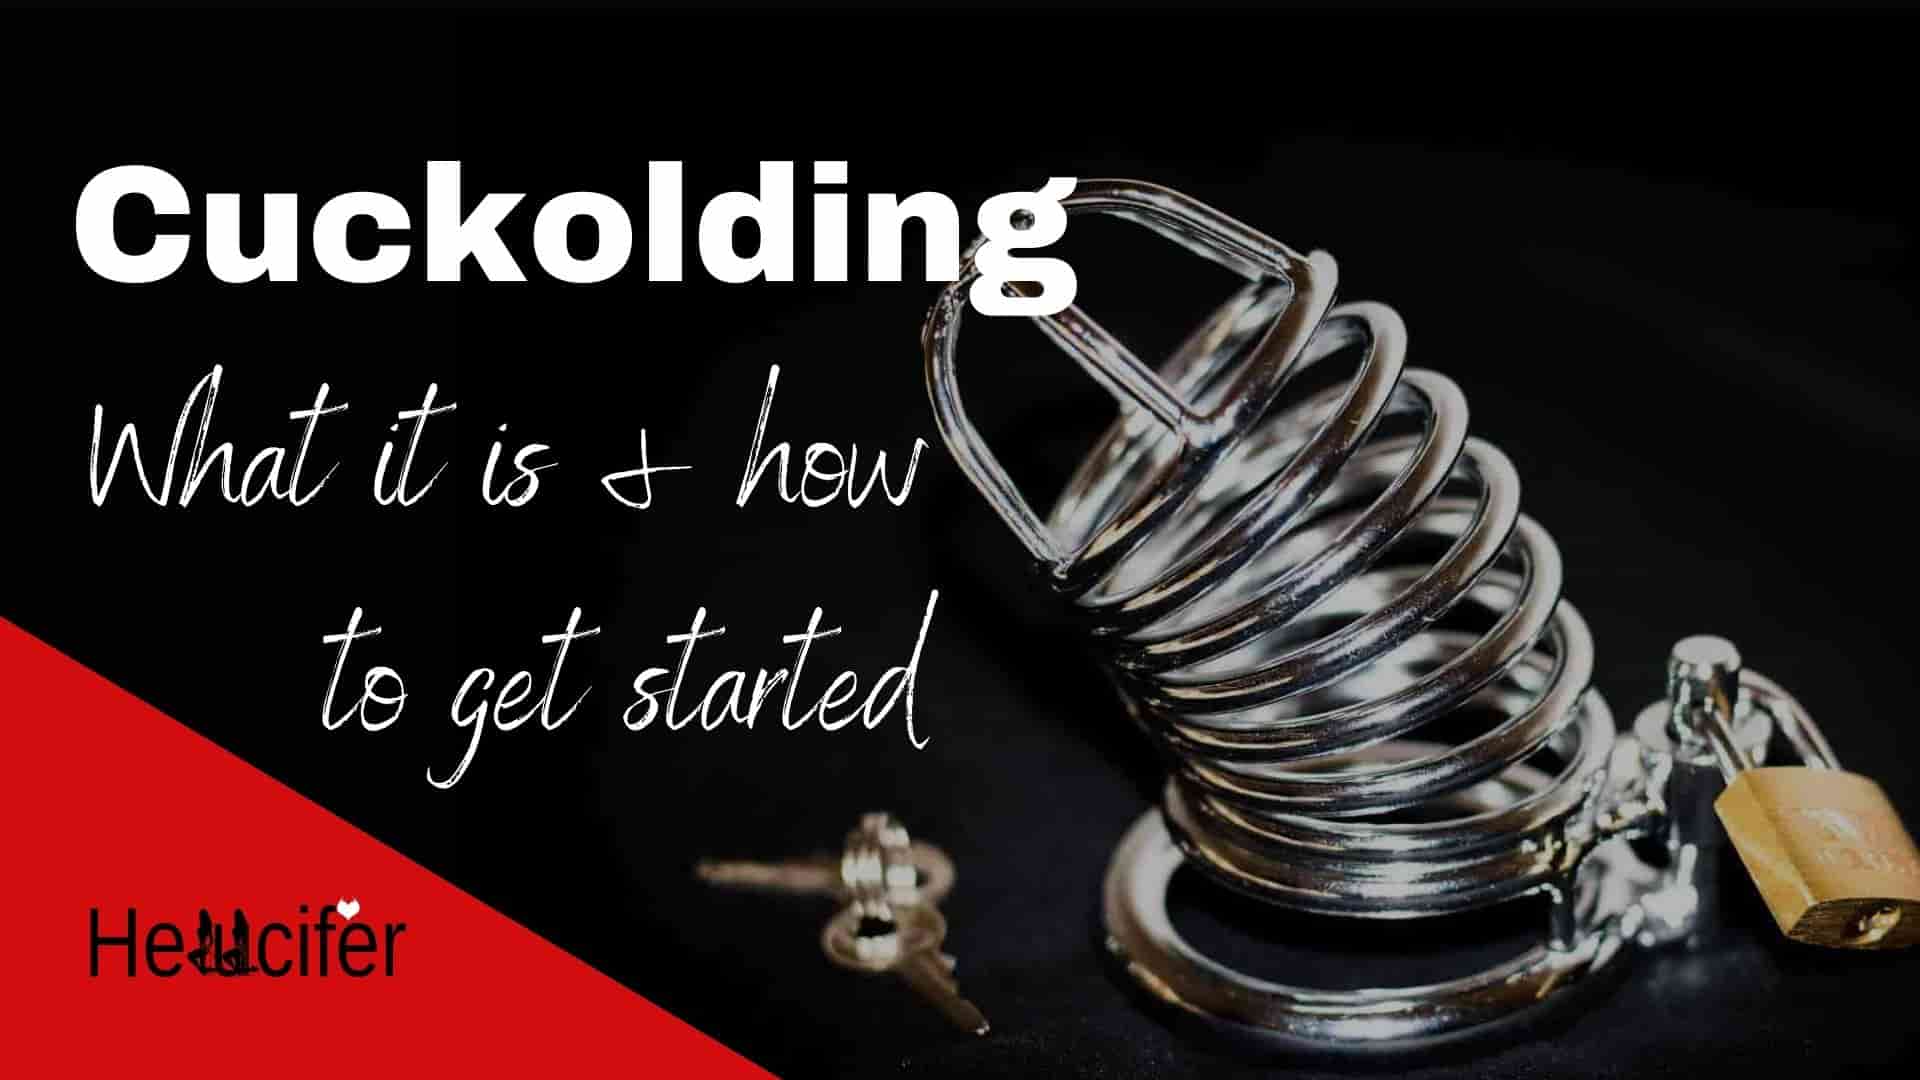 Cuckolding: What it is and how you can get started